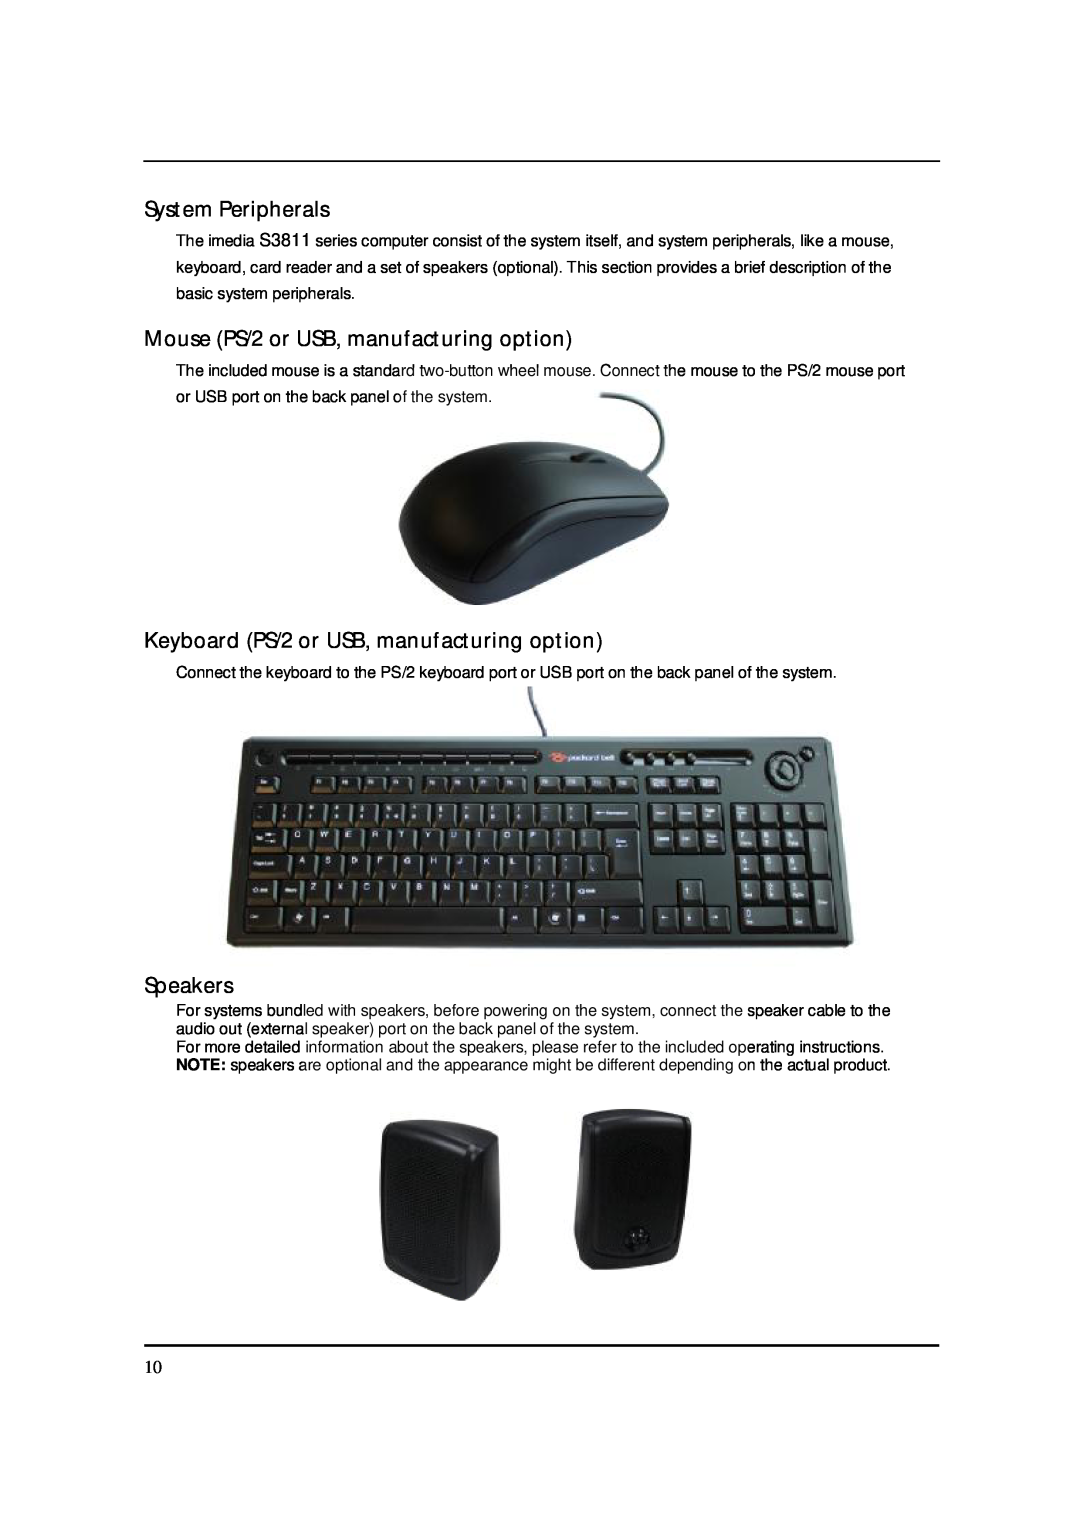 Acer S3811 manual System Peripherals, Mouse PS/2 or USB, manufacturing option, Keyboard PS/2 or USB, manufacturing option 